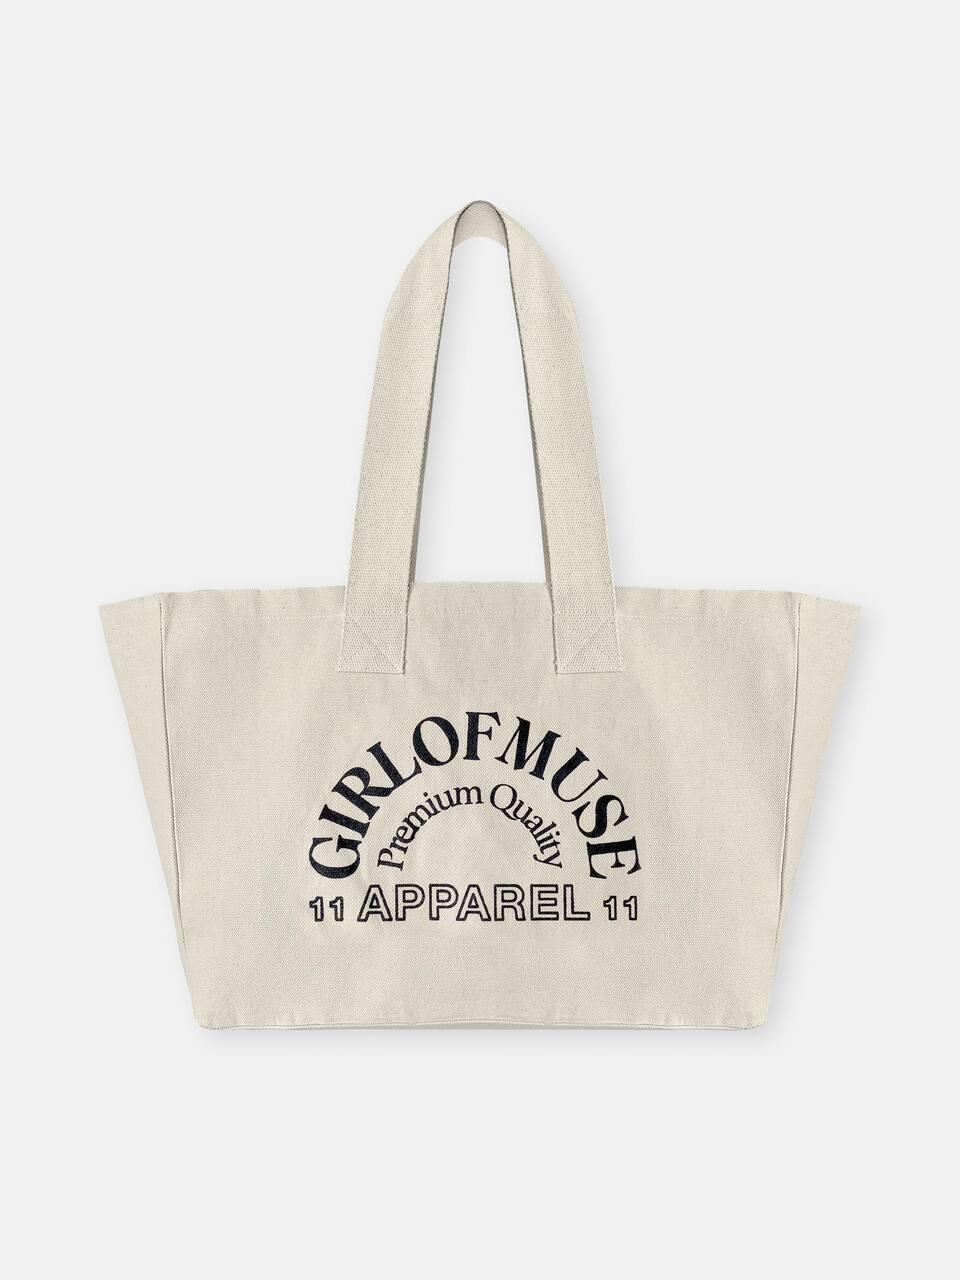 Girl of Muse - Apparel Tote